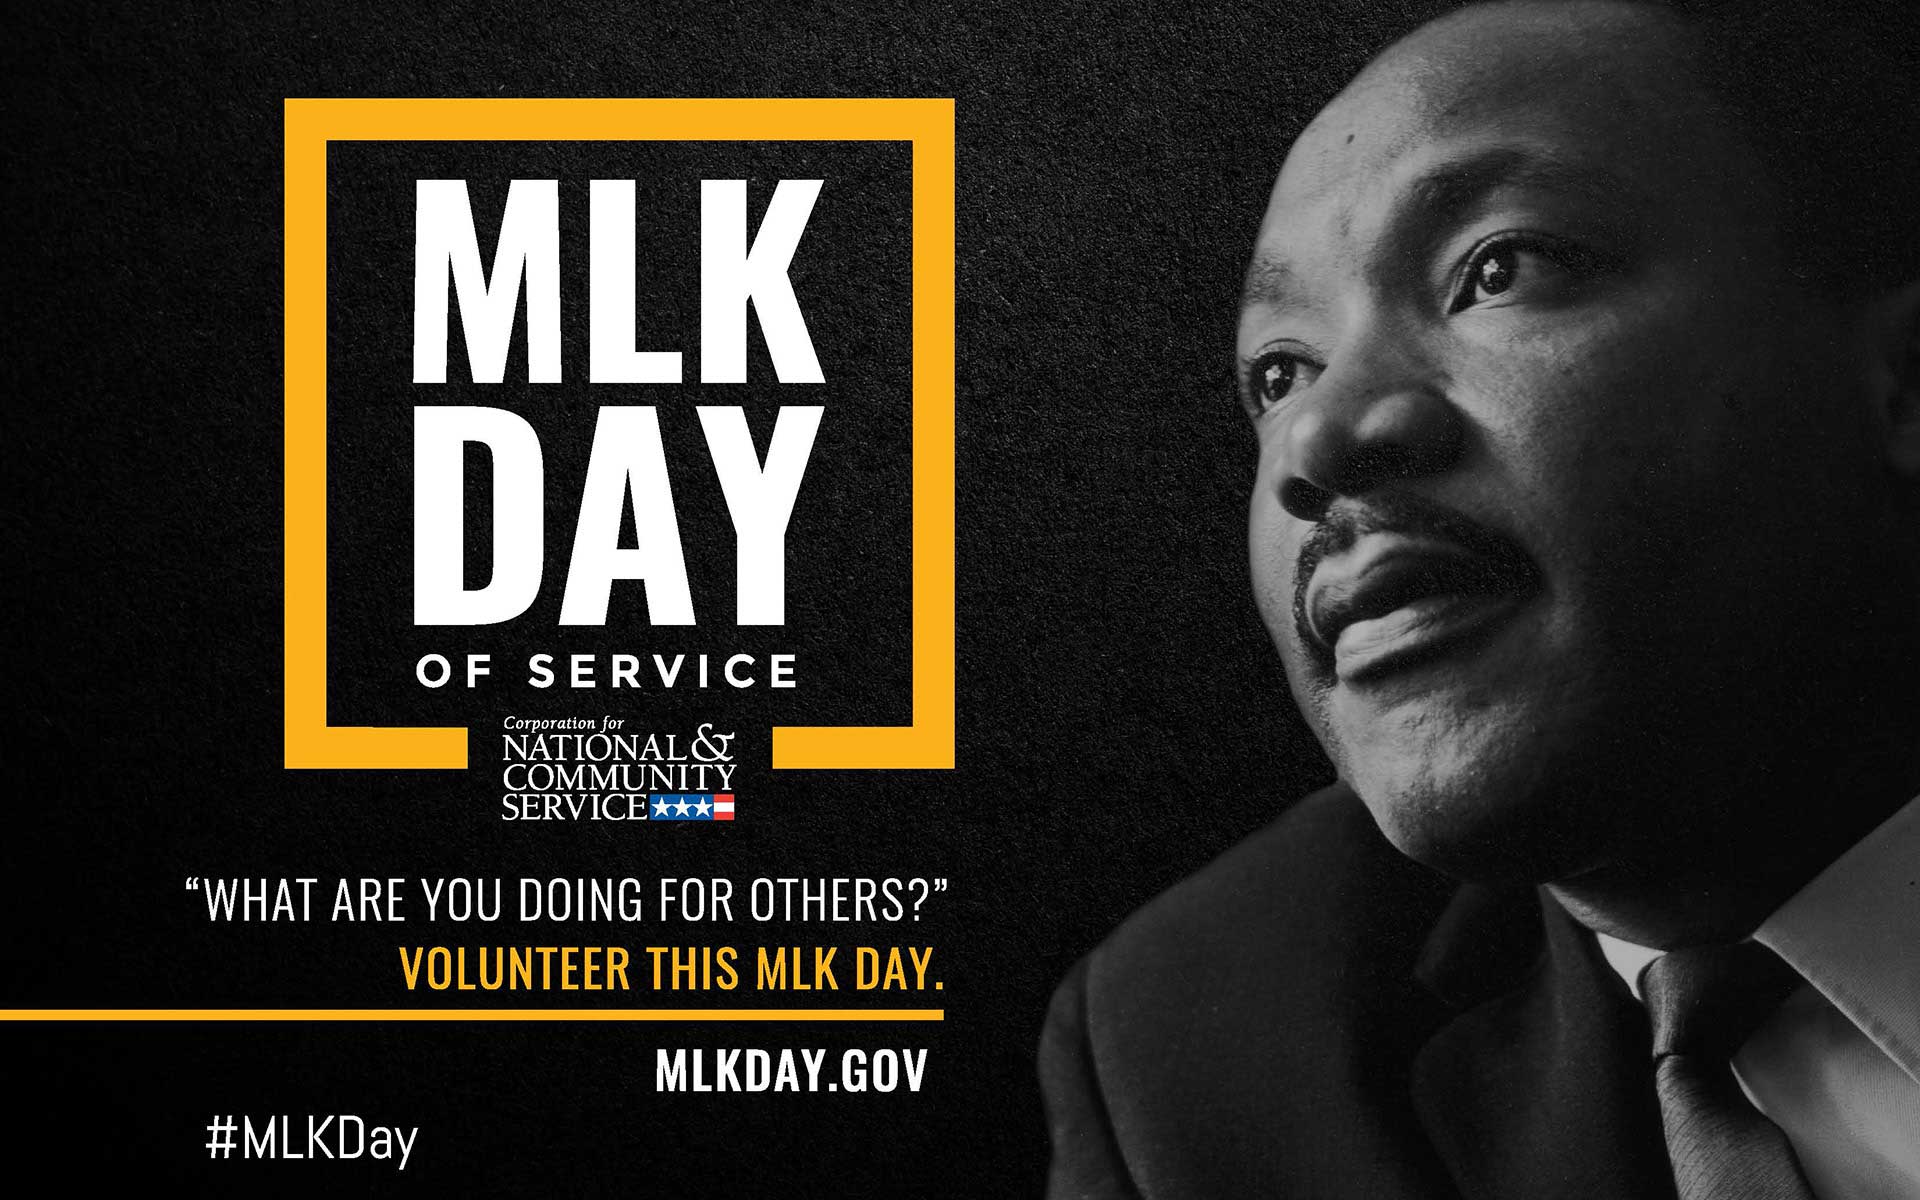 Martin Luther King Jr. Day 2020 Wallpapers - Wallpaper Cave